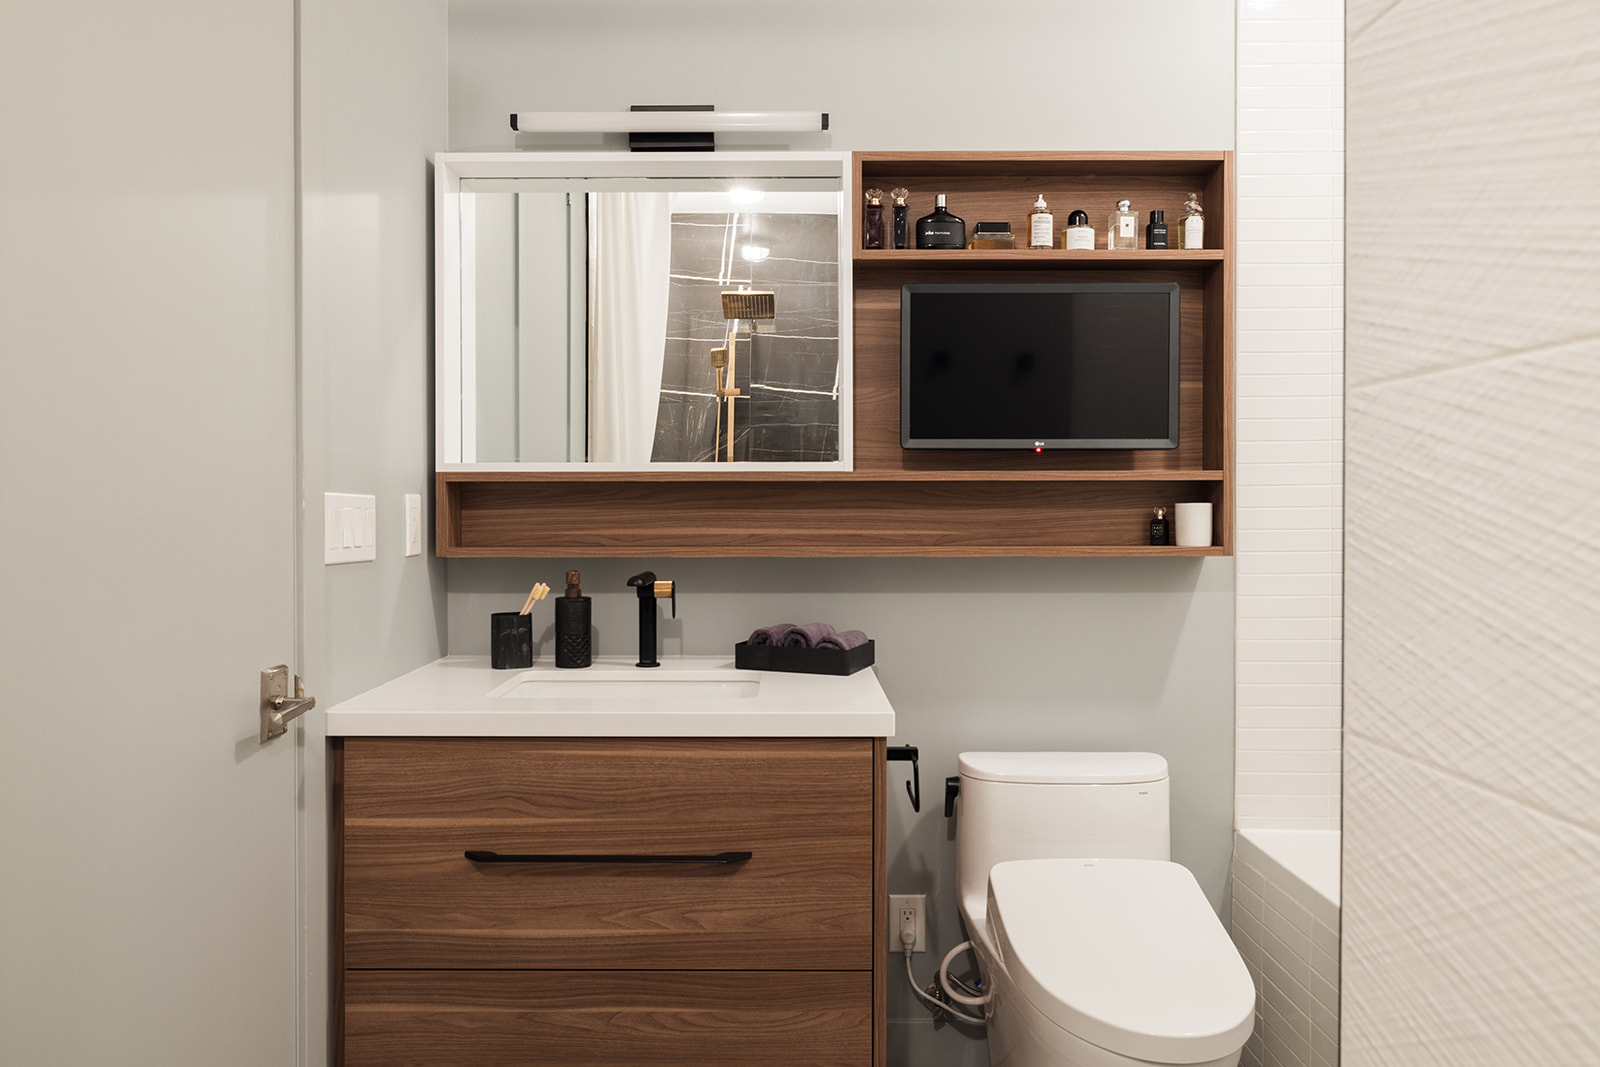 Built-in wall shelf and small TV above toilet in Toronto condo bathroom renovation